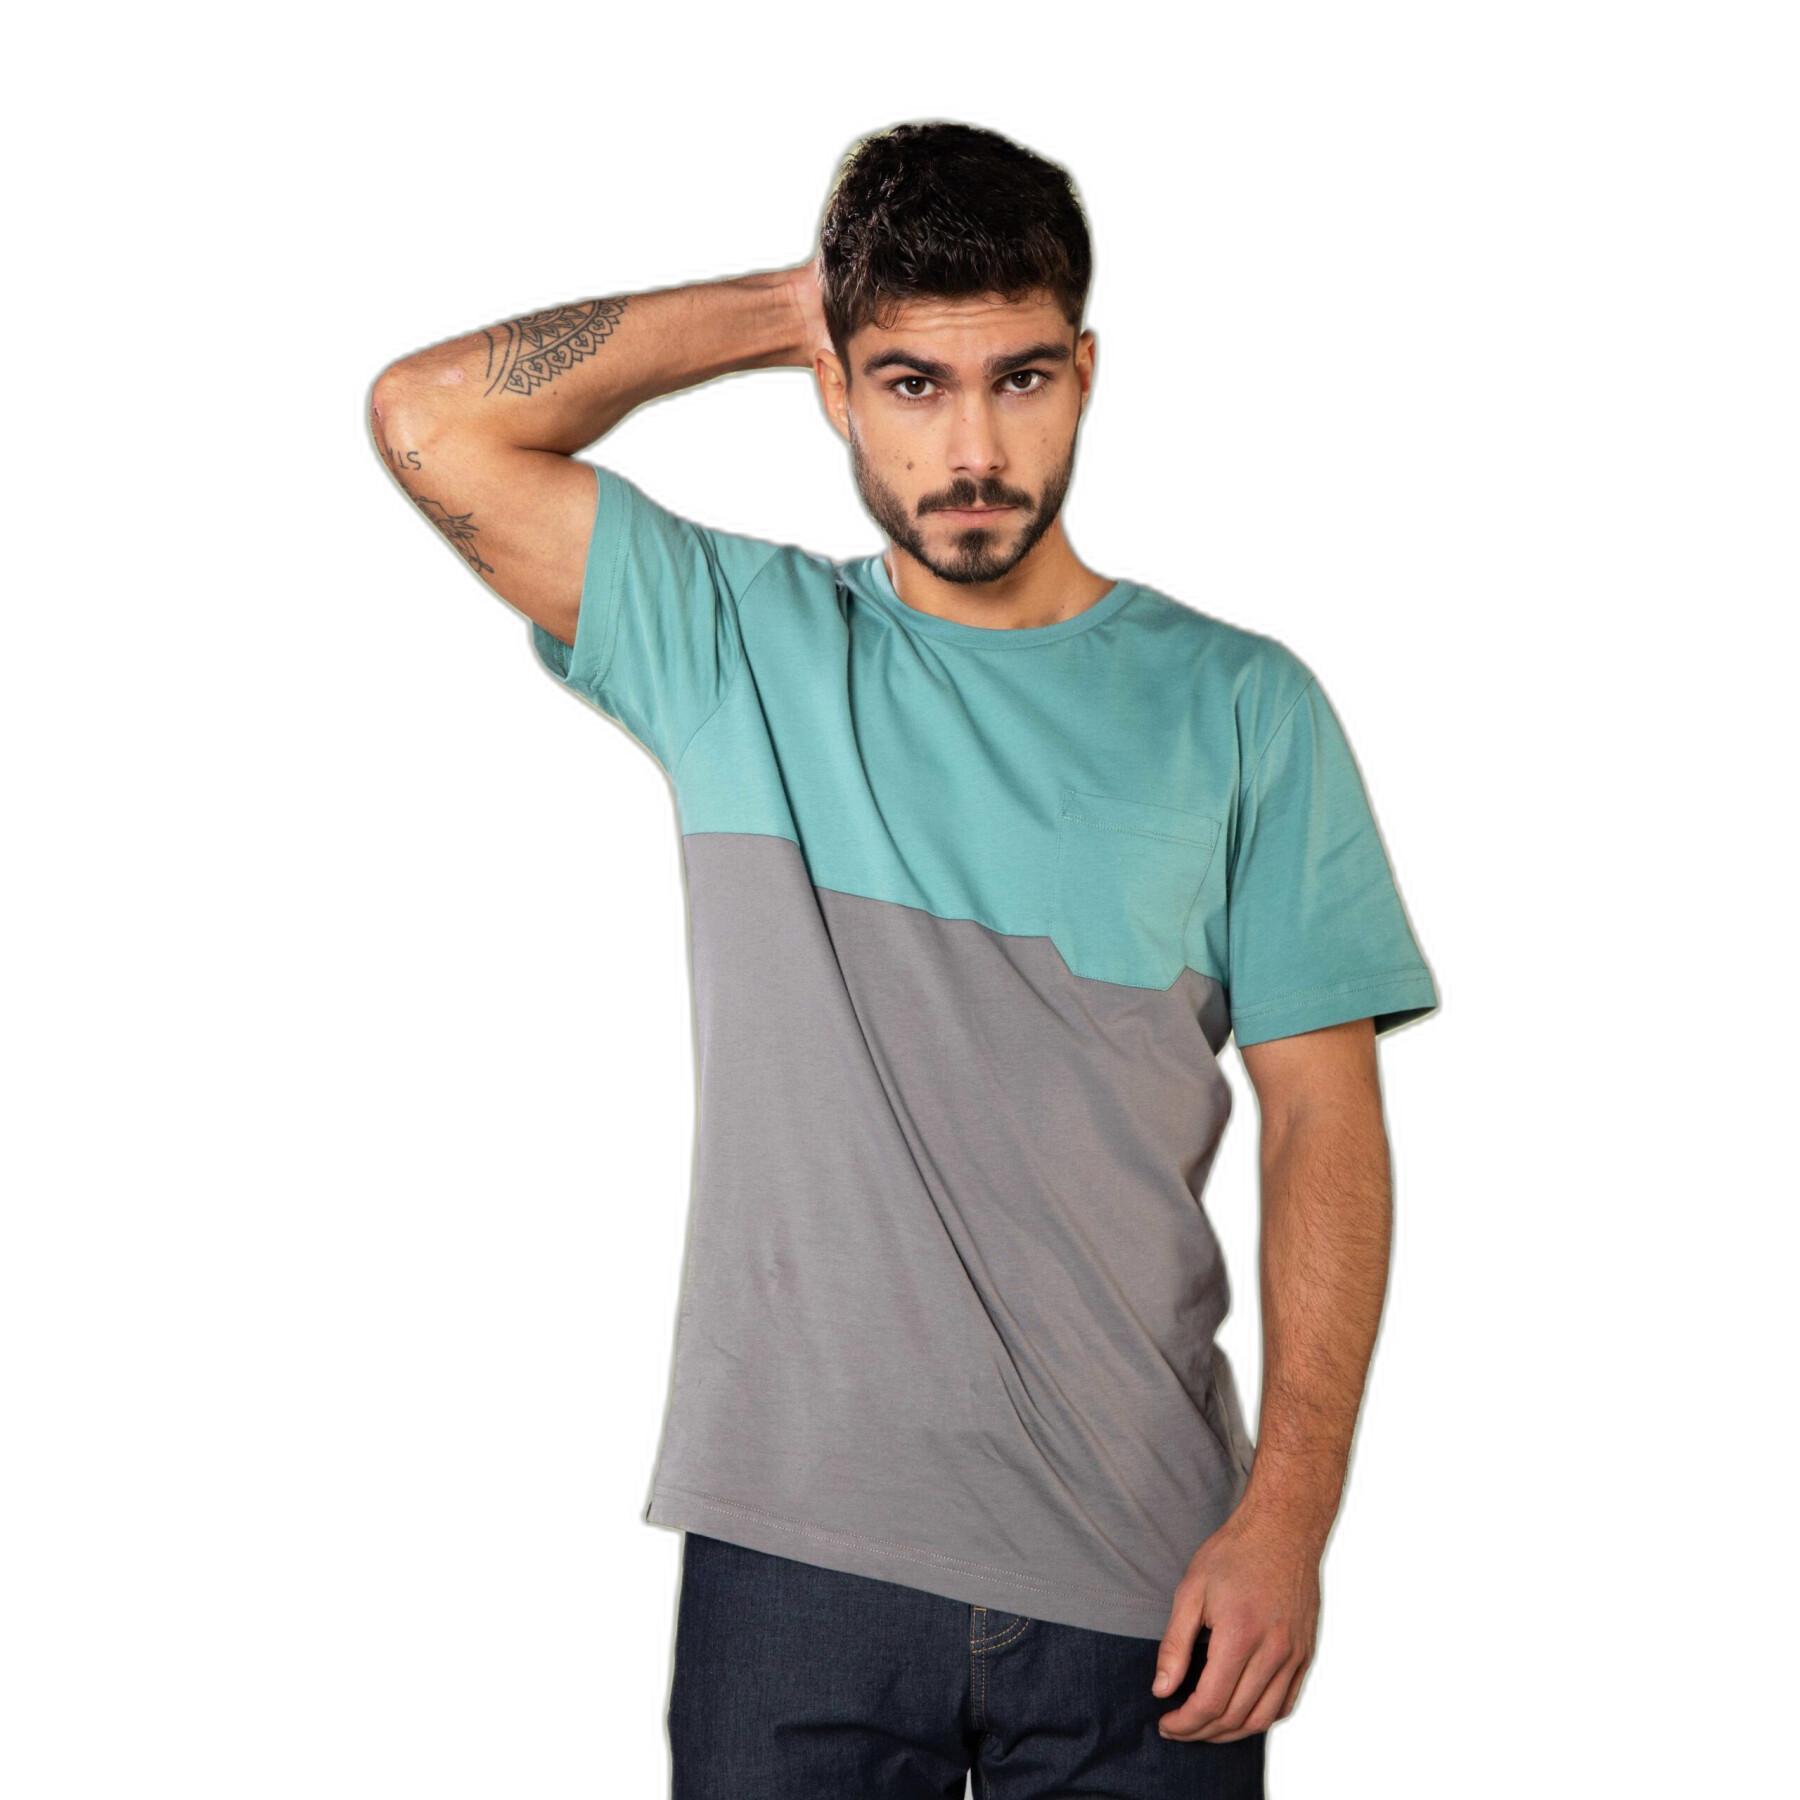 T-shirt with two-colored pocket Snap Climbing